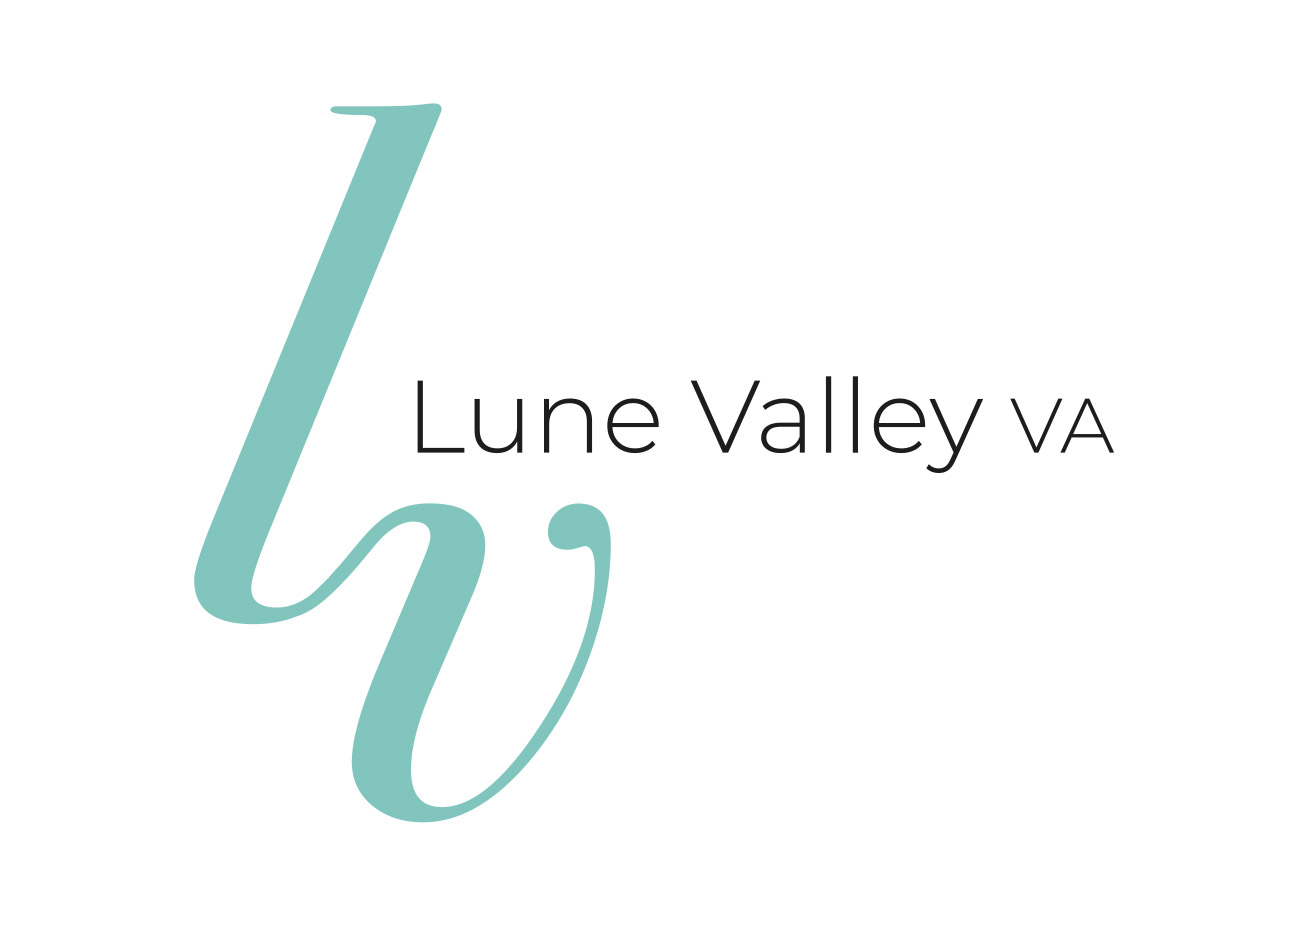 Lune Valley VA, Your Trusted Virtual Assistant